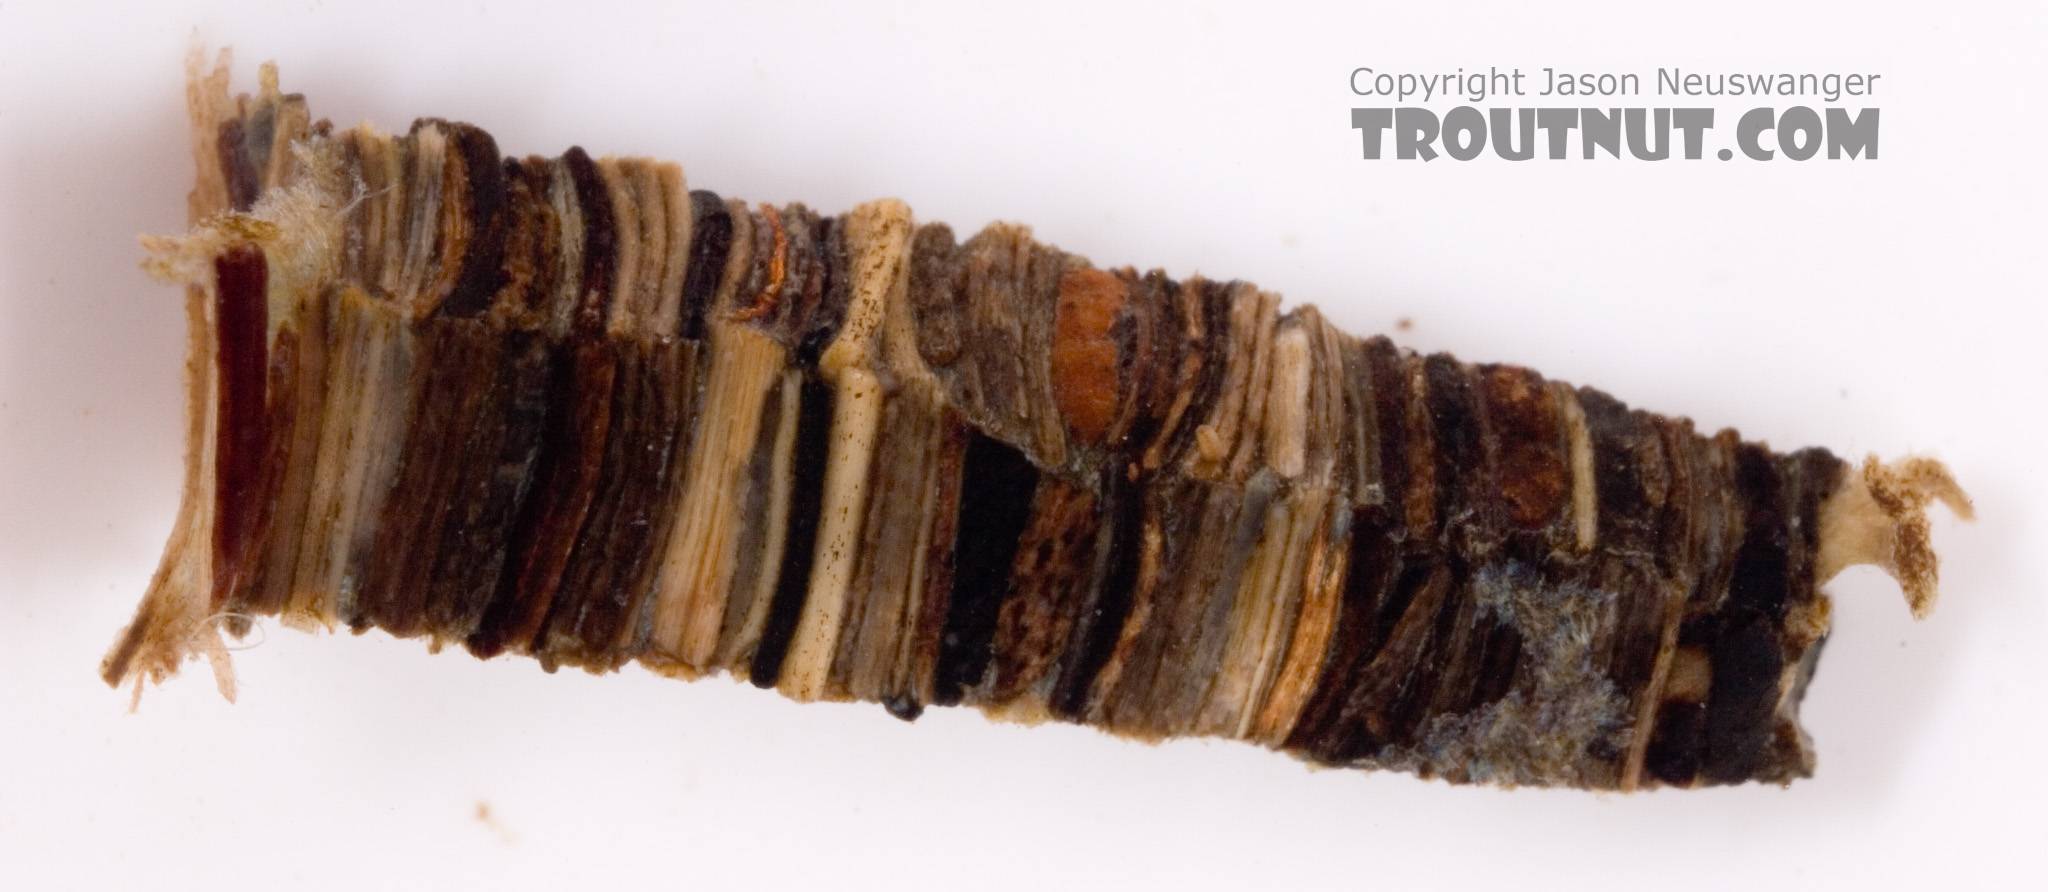 This angle shows off the square cross-section of the case.  It has an incredibly tidy log cabin look to it.  Brachycentrus (Grannoms) Caddisfly Pupa from Cayuta Creek in New York